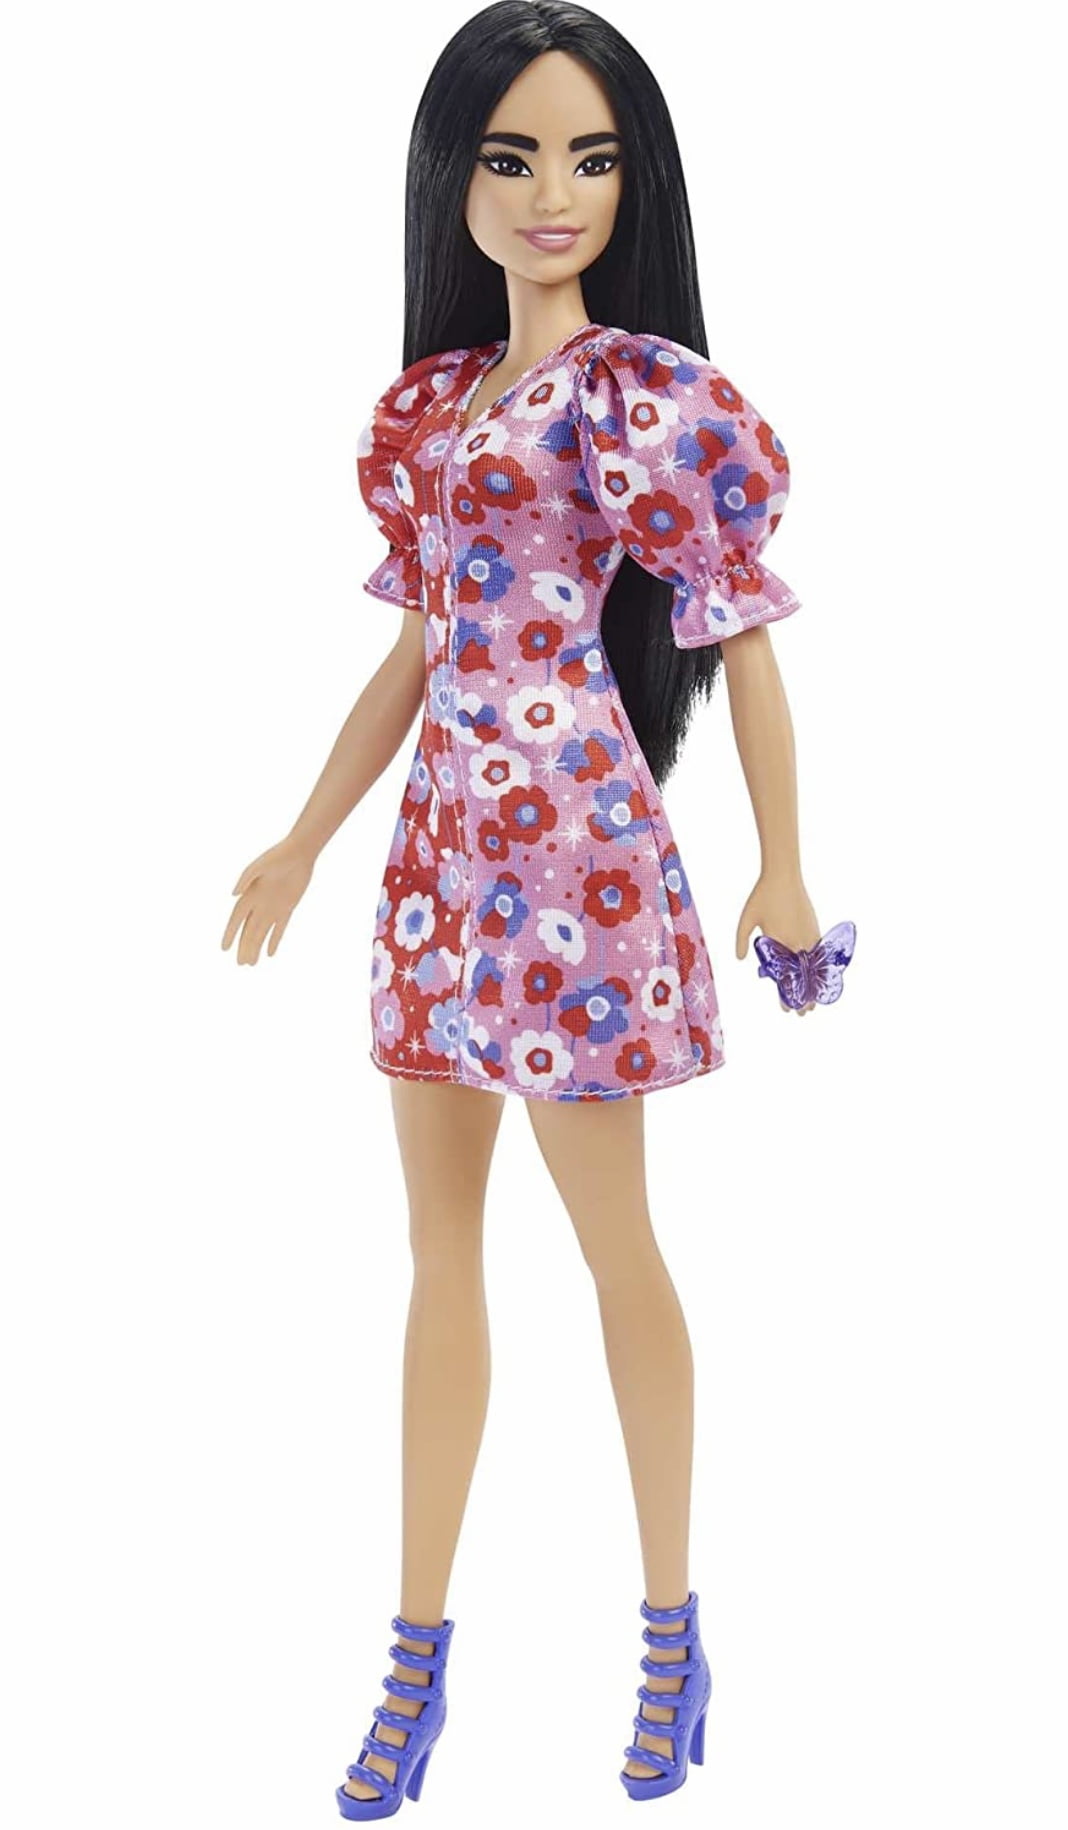 Barbie Fashionistas Doll, with Long Black Hair & Color Block Floral ...